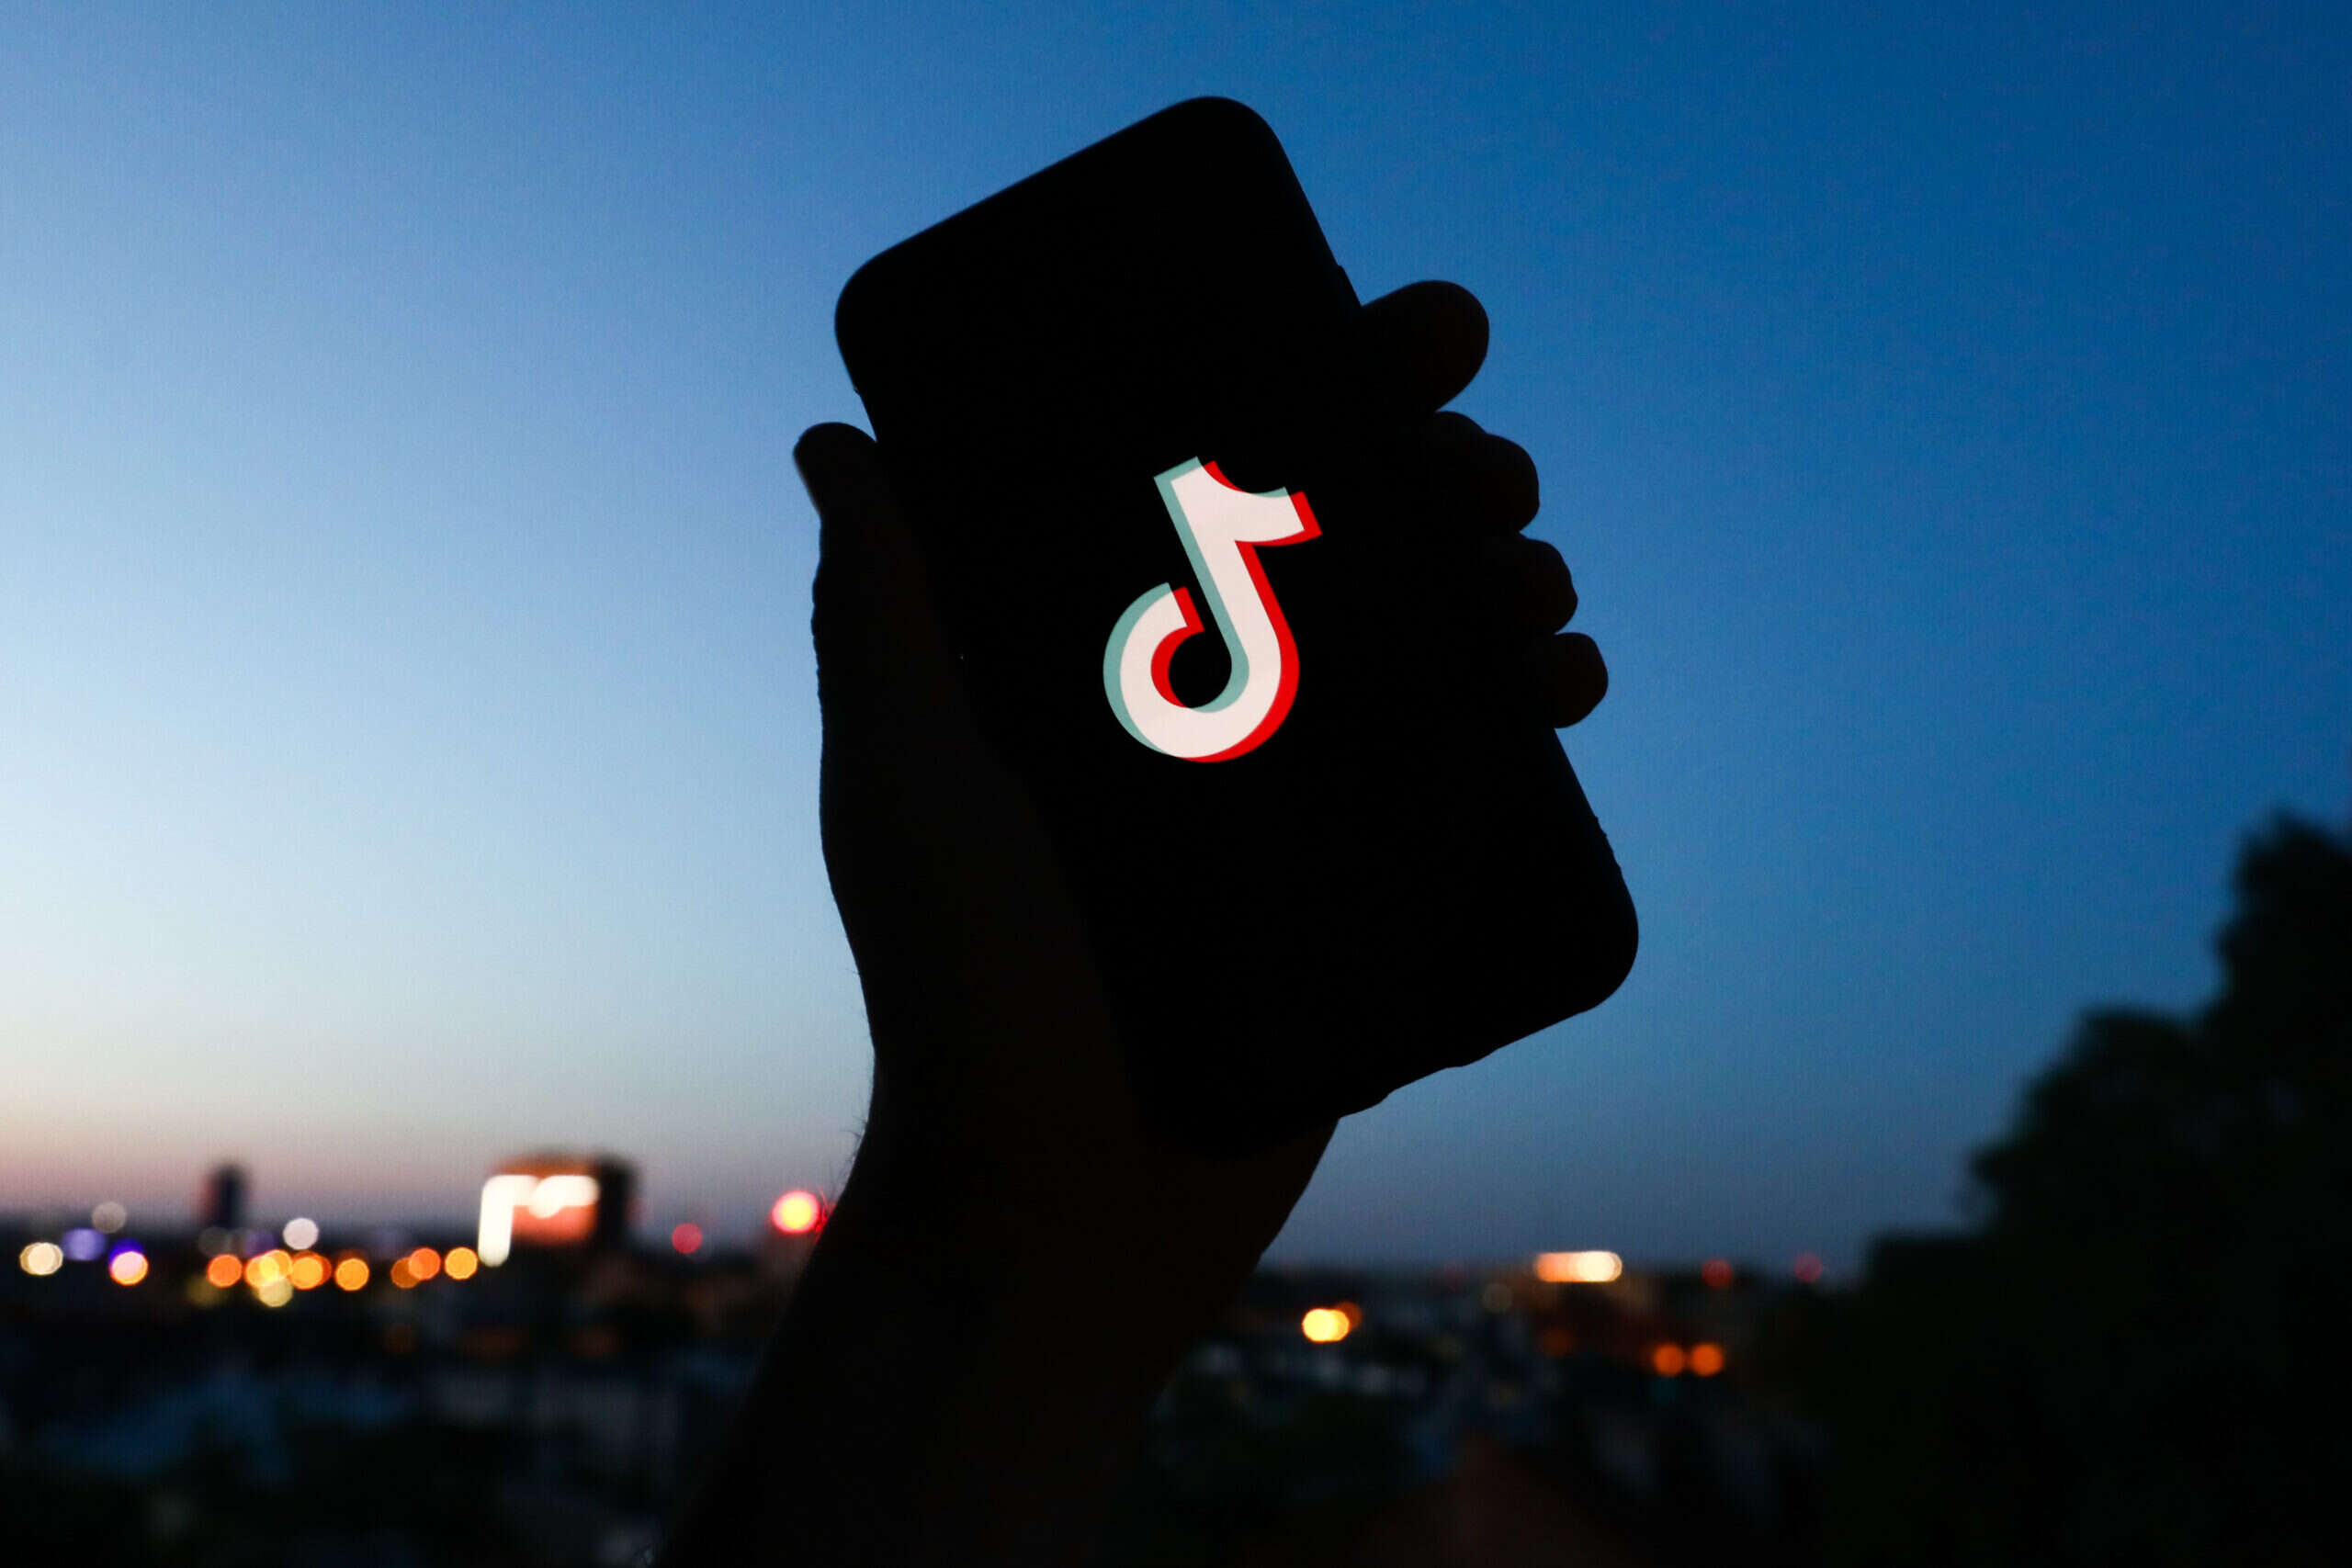 TikTok World: Building for the future of entertainment and advertising